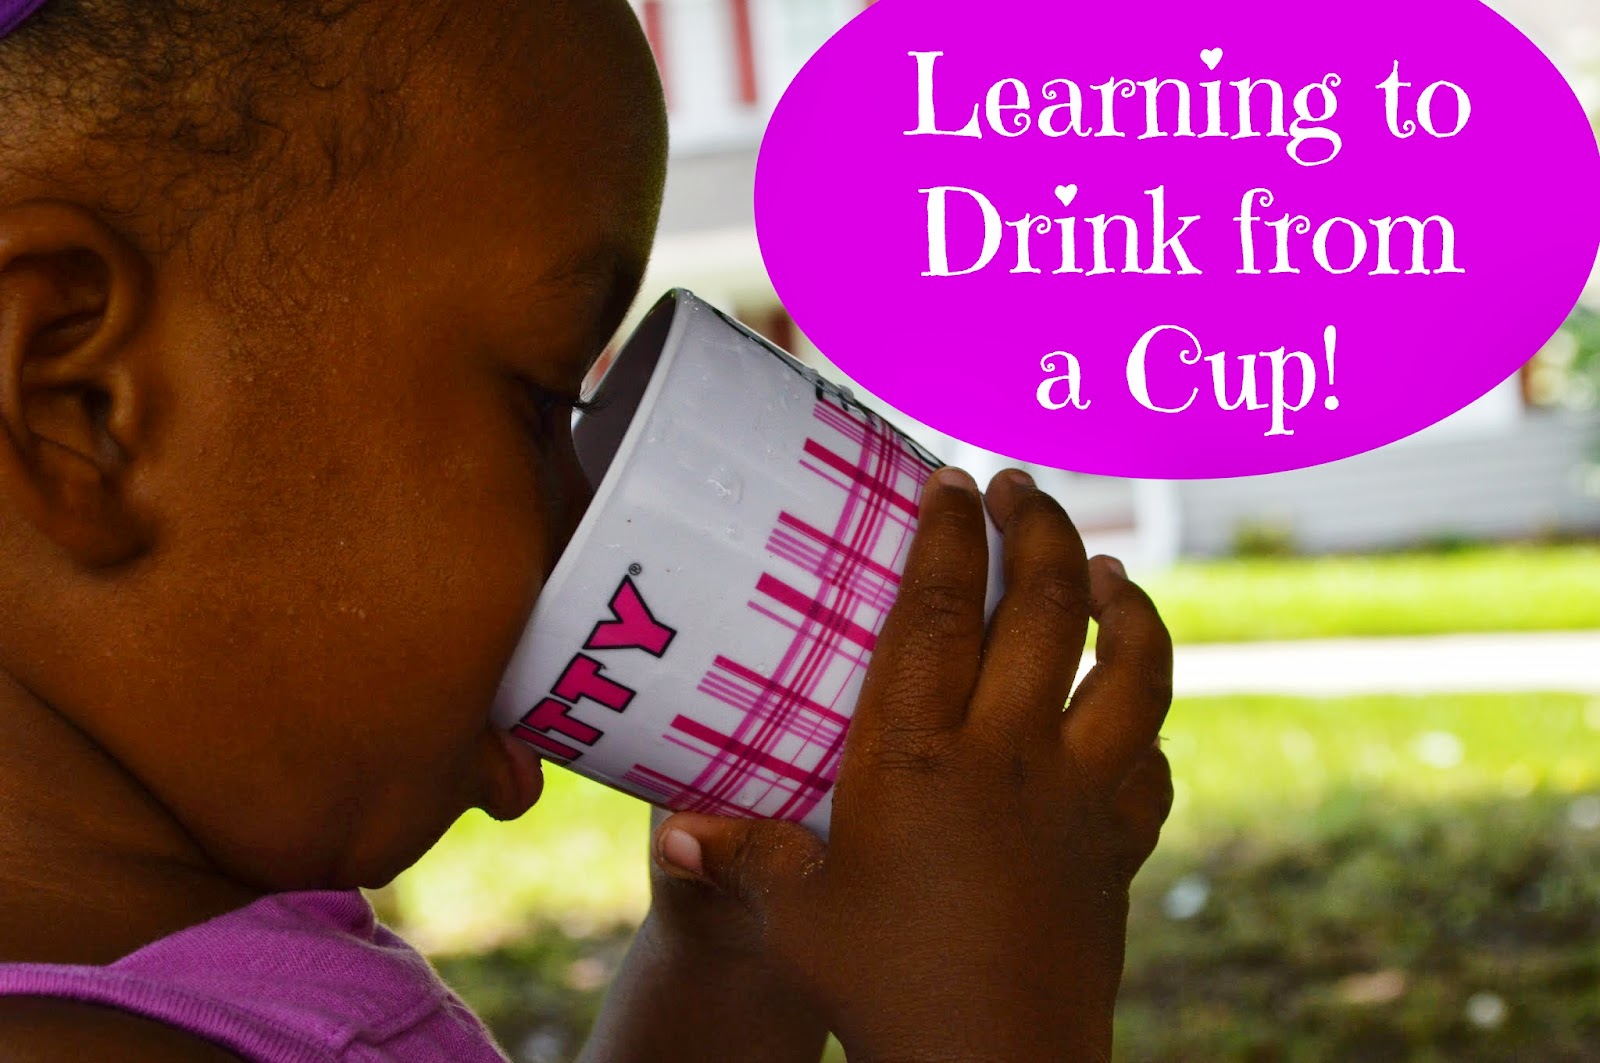 Learning How to Drink from a Cup